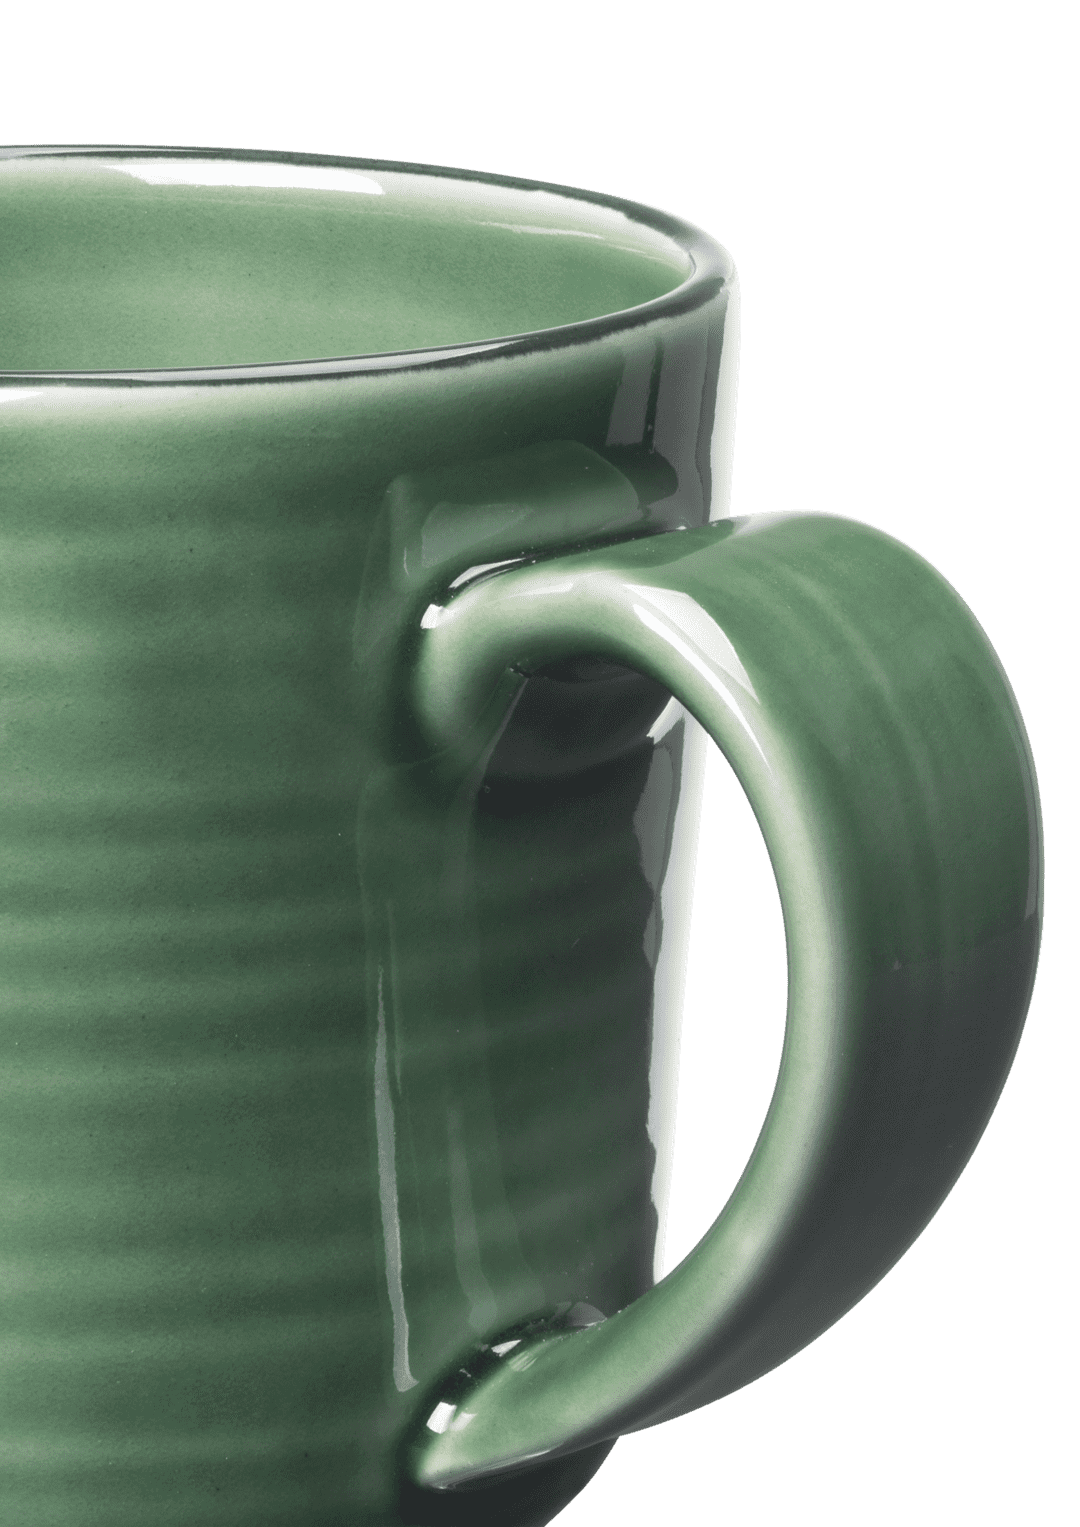 Colore Mug with handle 33cl sage green